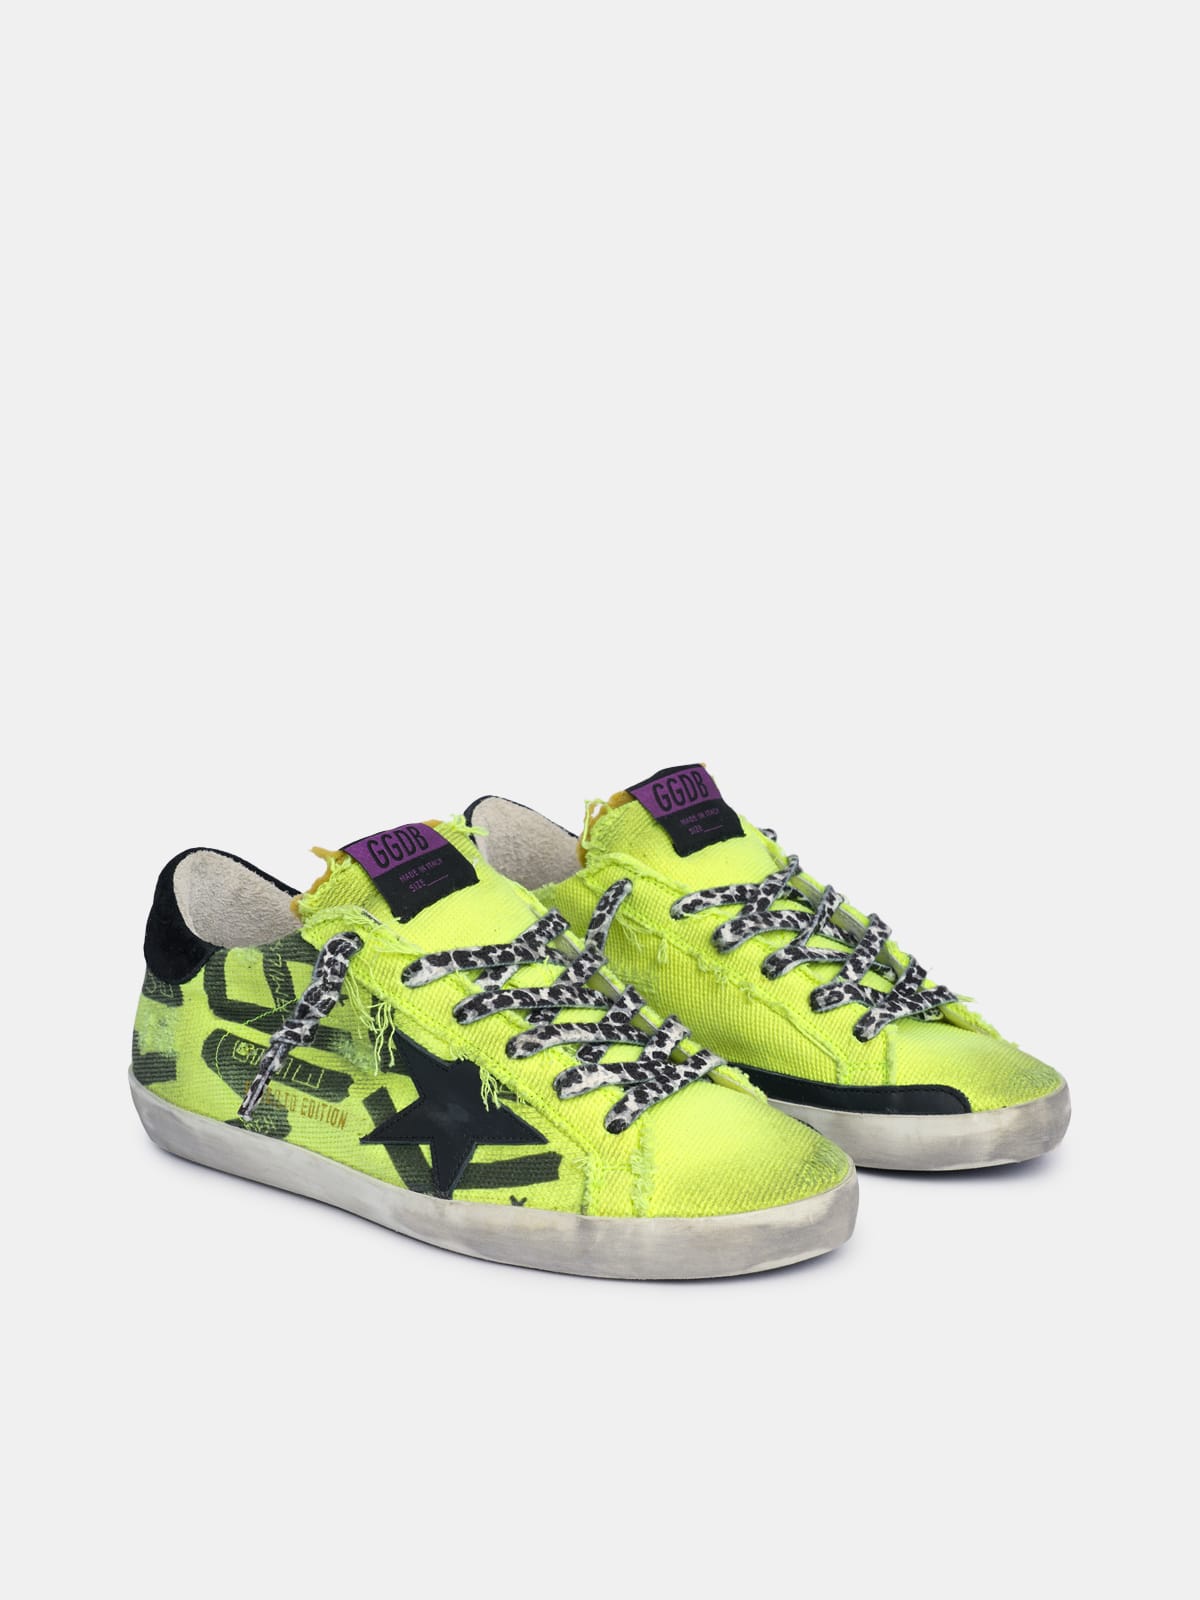 Golden Goose - Super-Star sneakers in fluorescent yellow cotton with contrasting black decorations in 